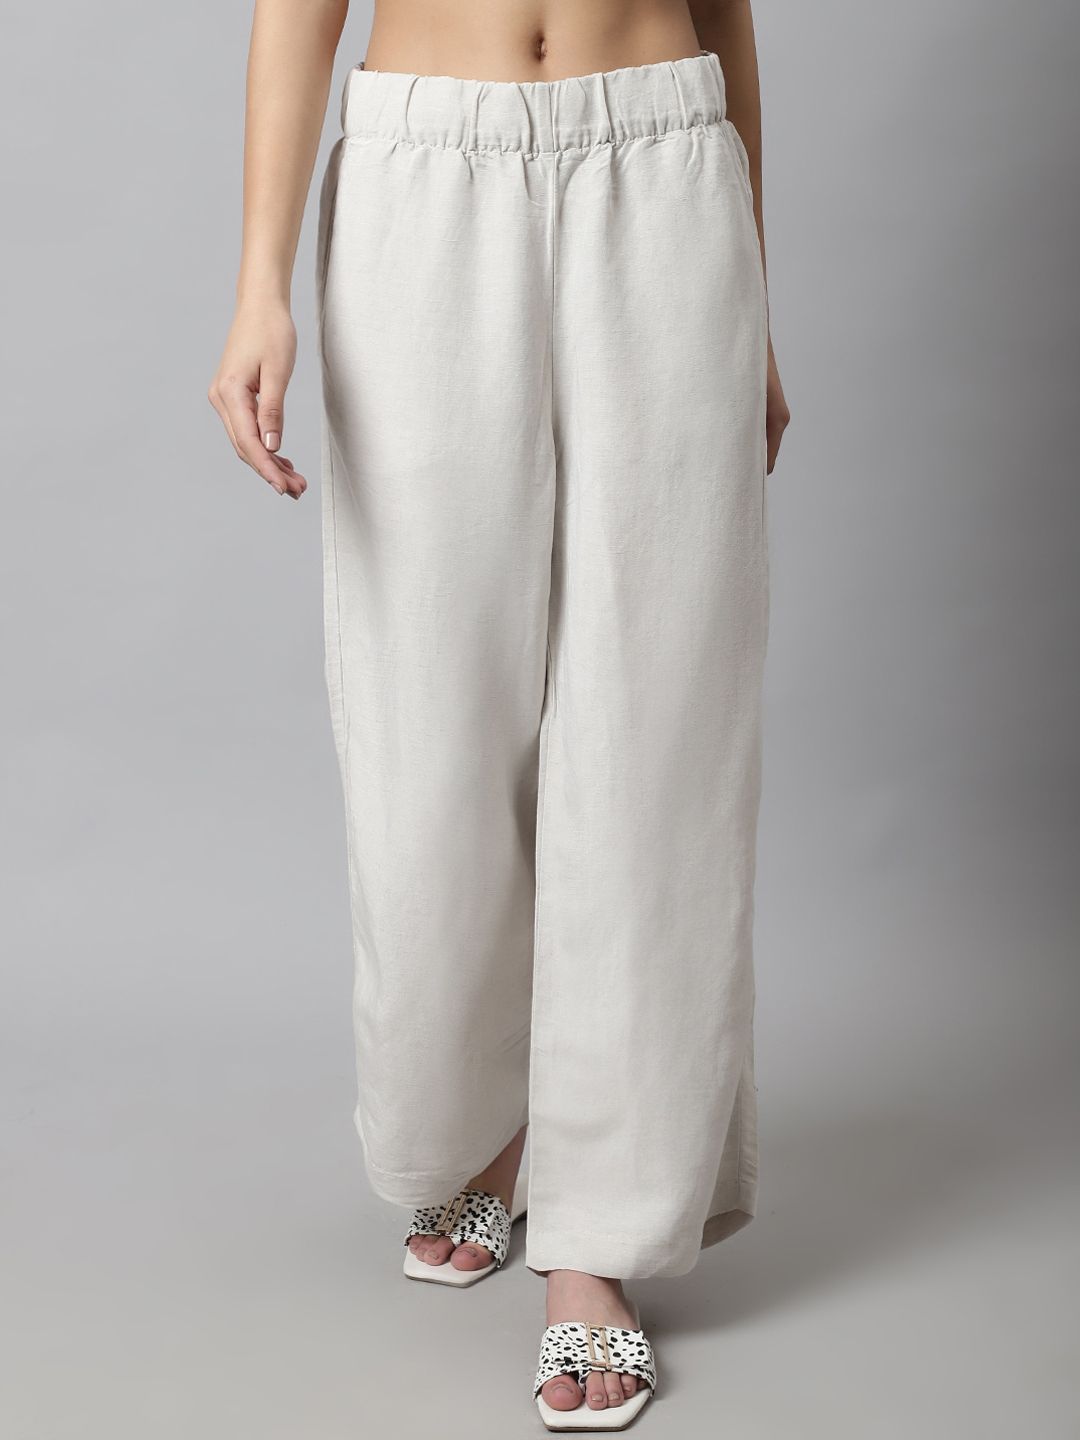 NoBarr Women Cotton Trousers Price in India